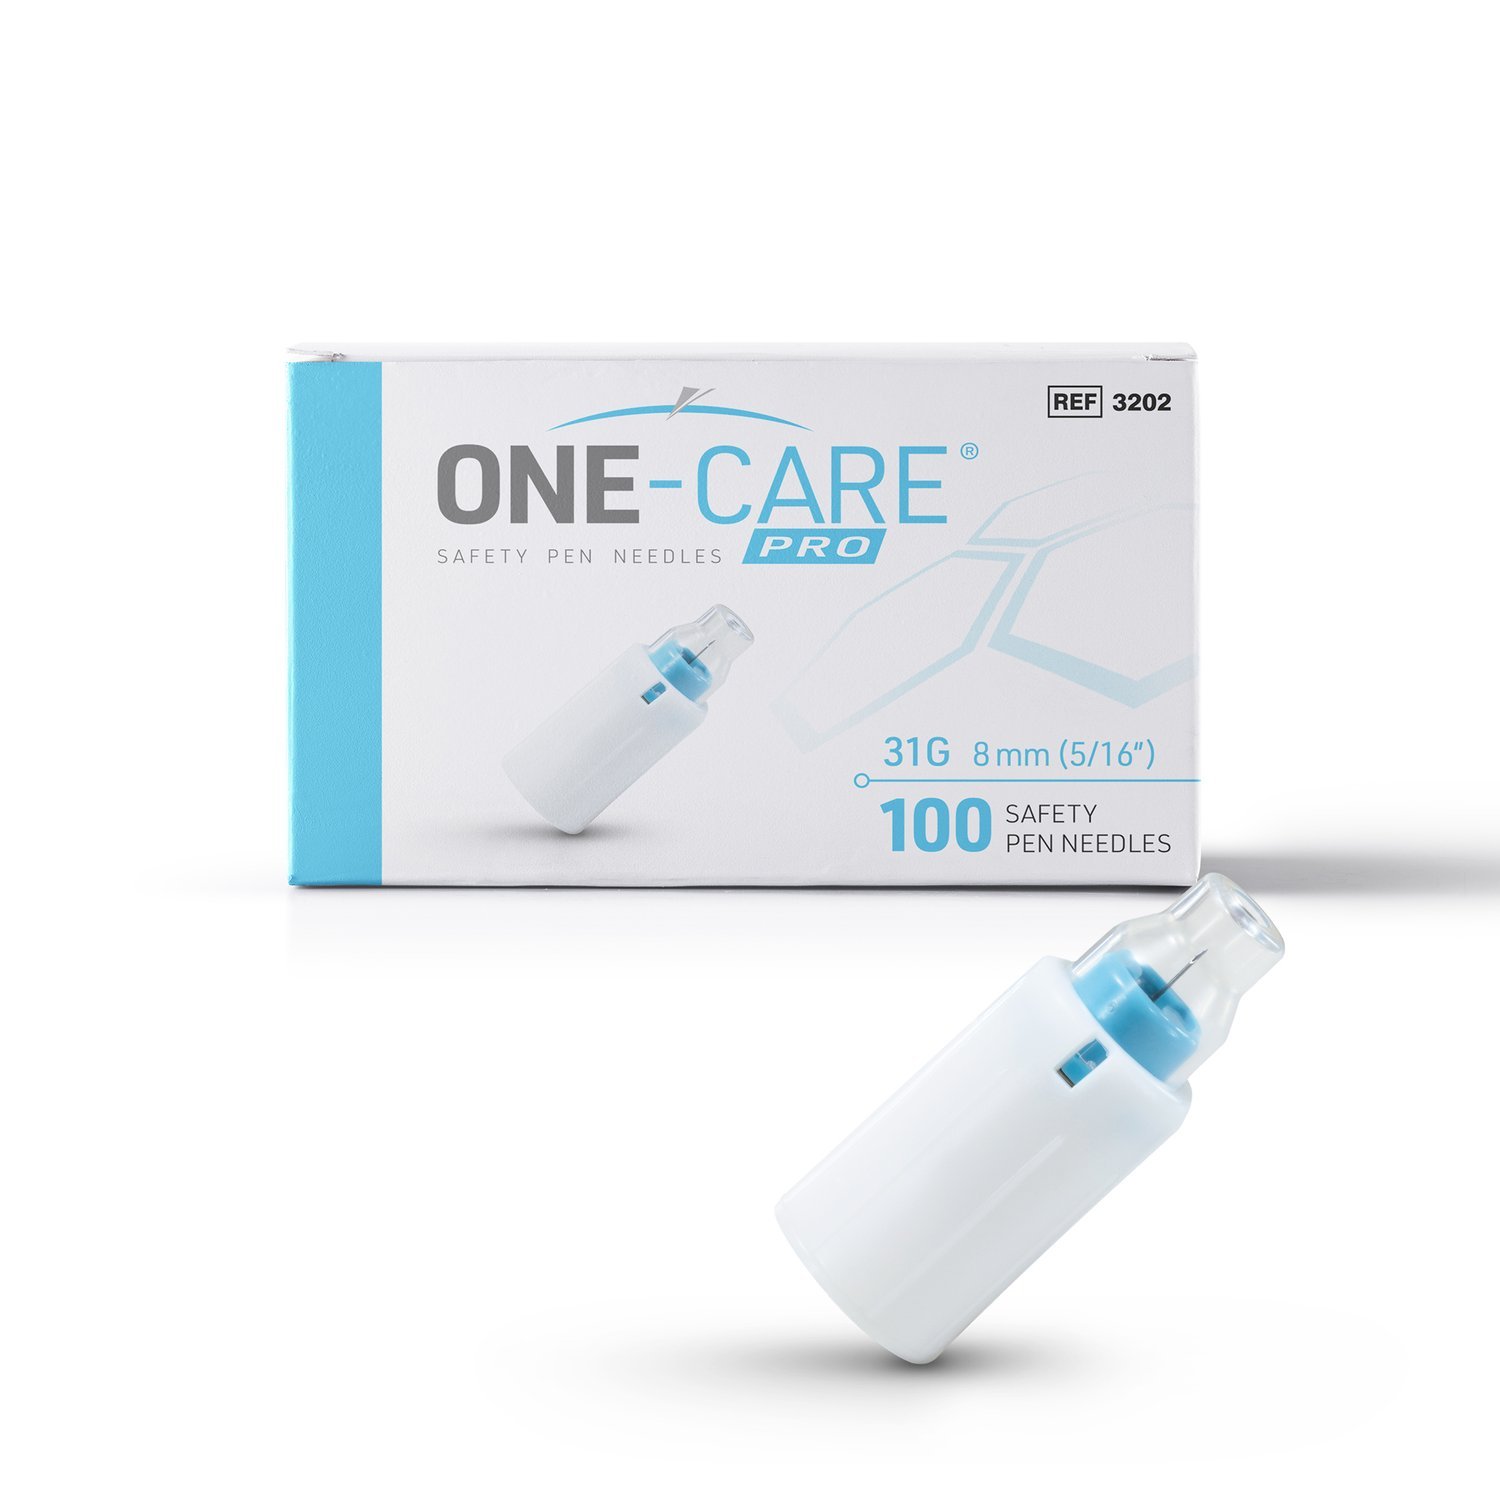 MediVena ONE-CARE® PRO Safety Pen Needles — ONE-CARE™